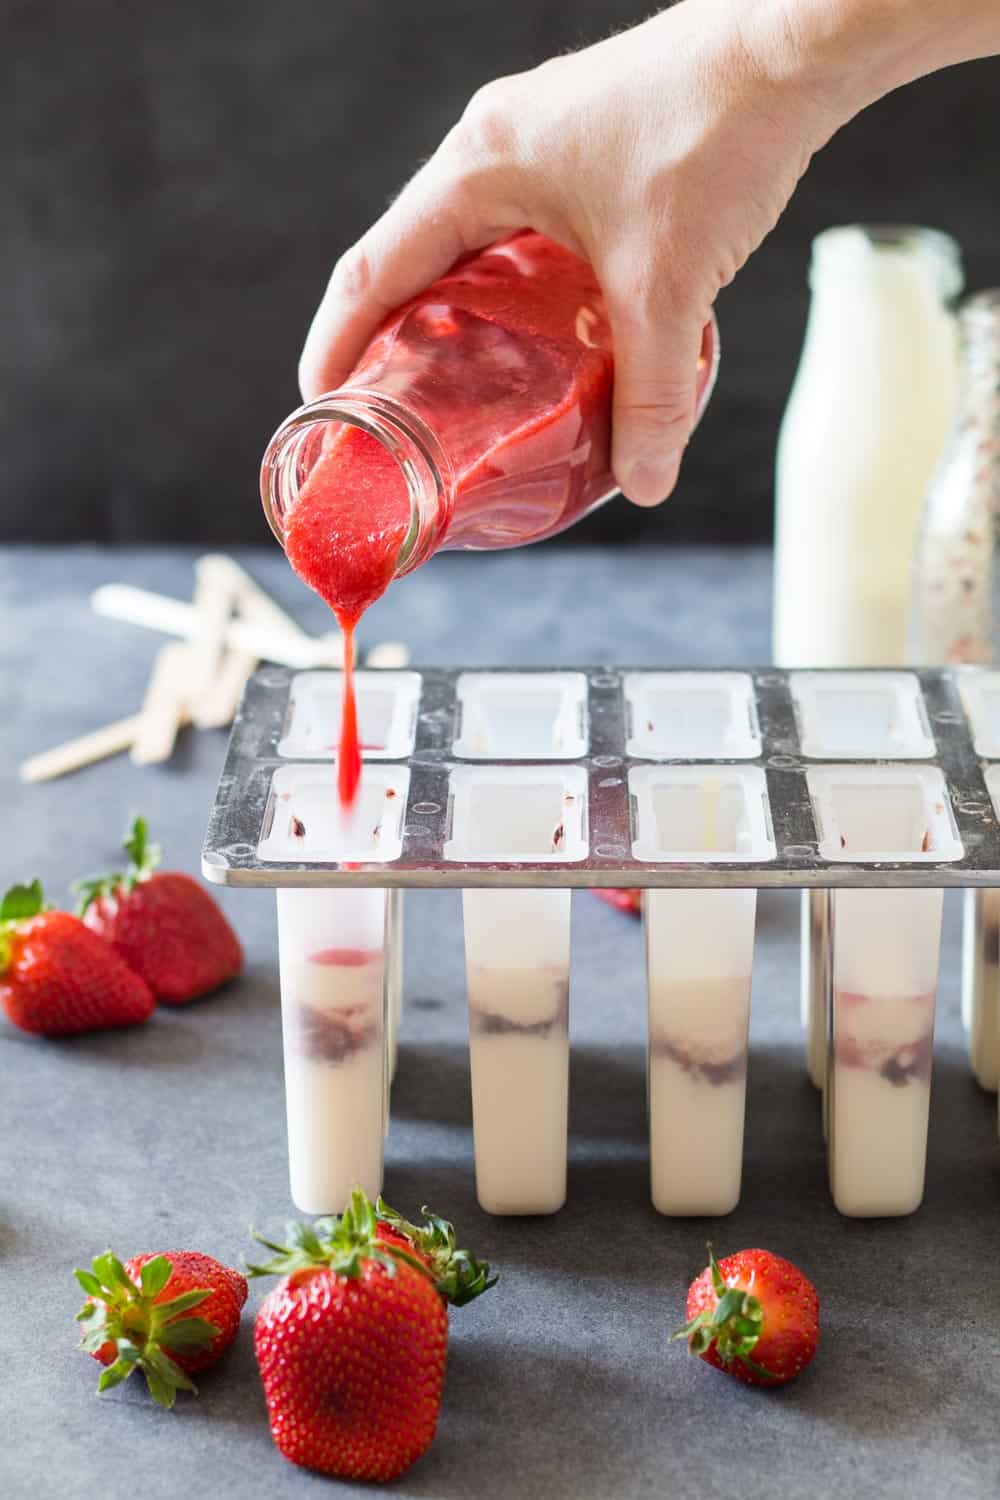 Hand pouring strawberry mix into popsicle molds containing greek yogurt and blueberry mix.